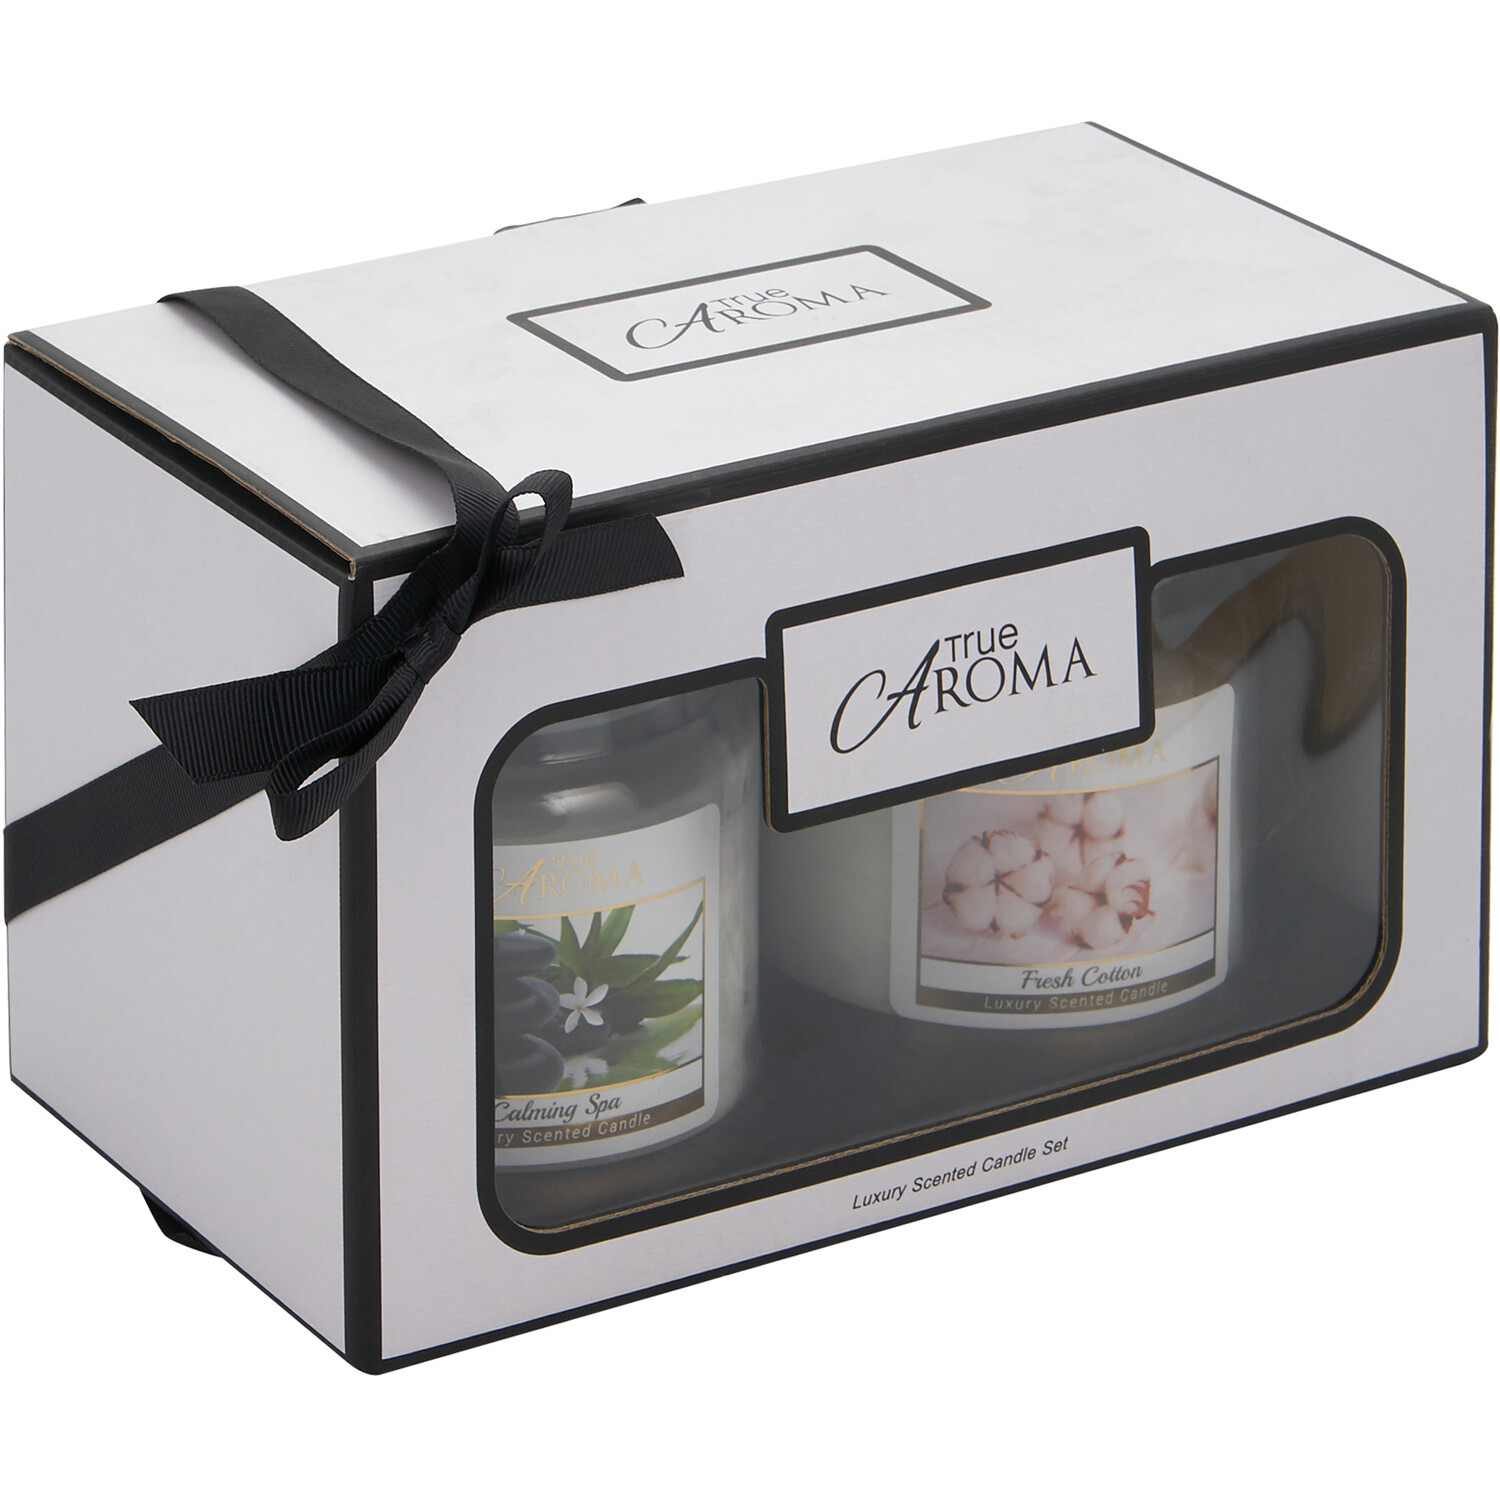 Calming Spa & Fresh Cotton Candle Pack - White Image 3